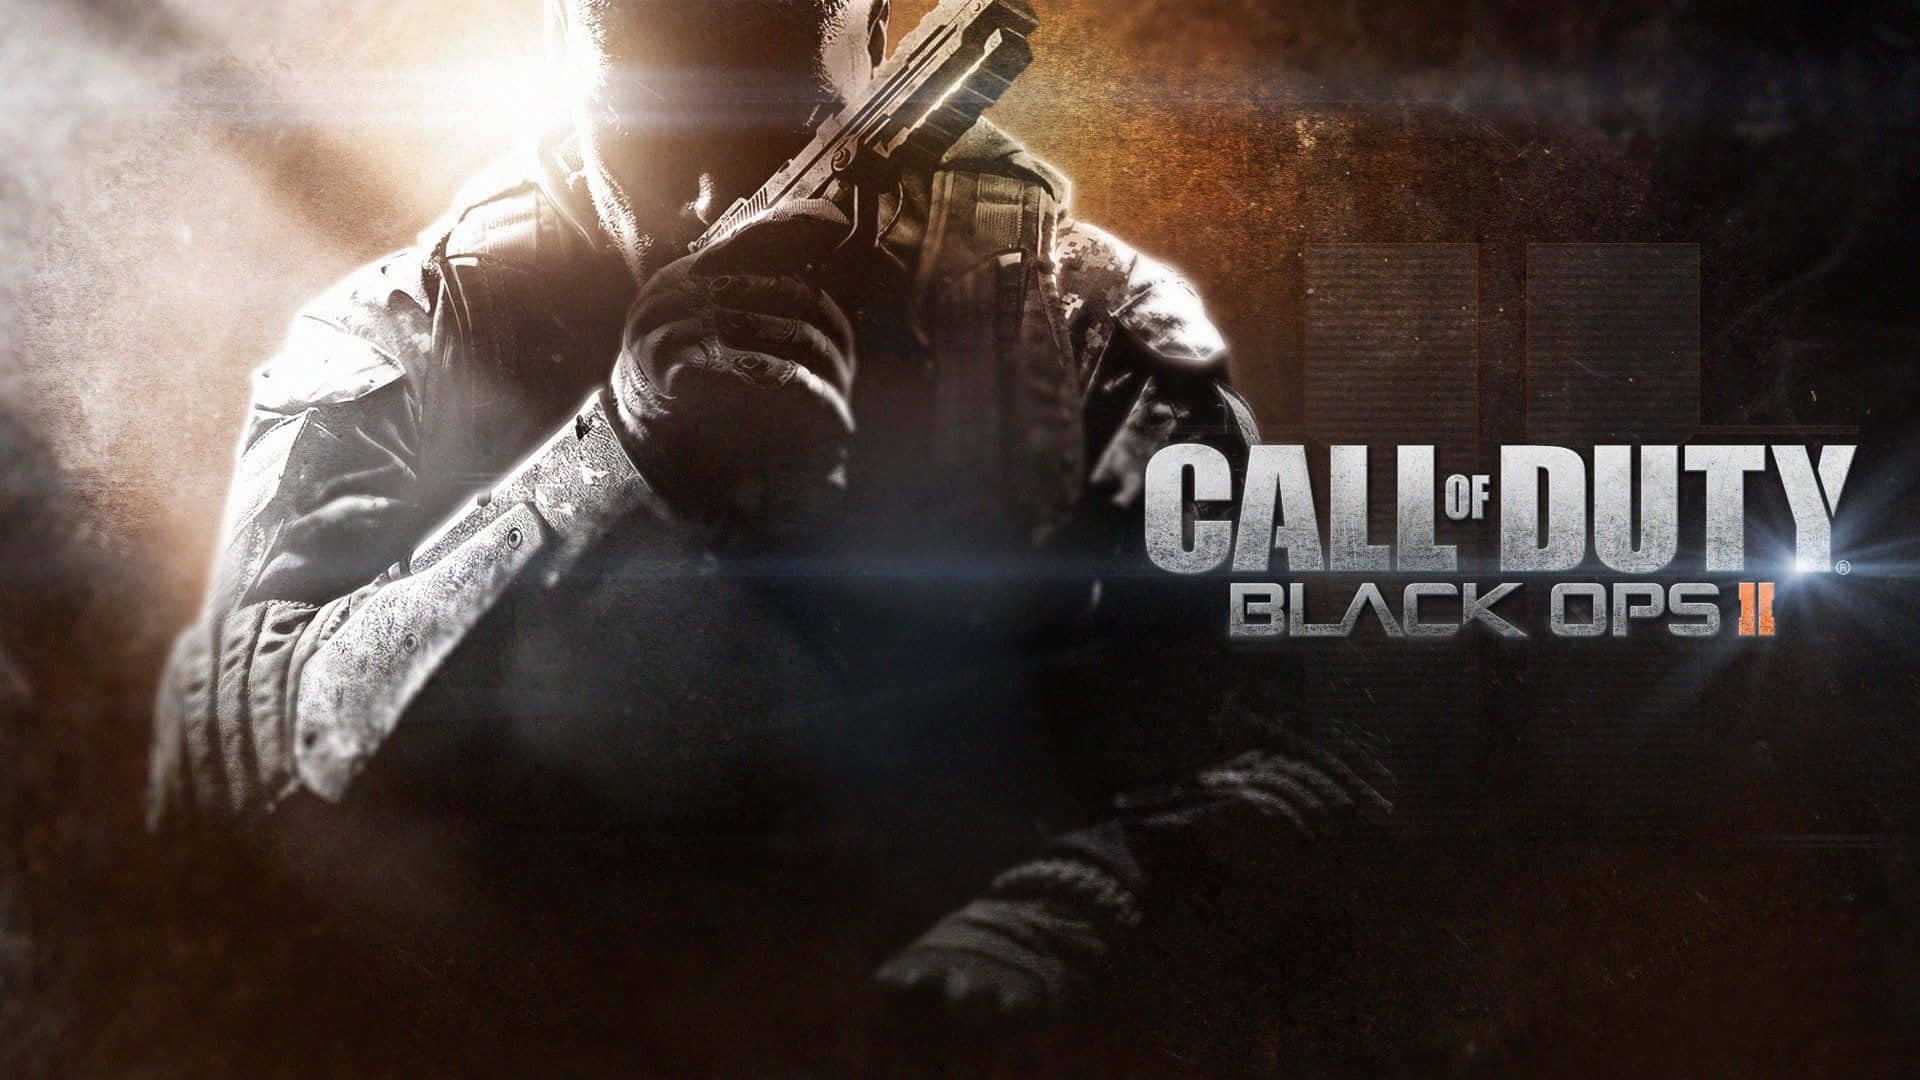 “Call of Duty Black Ops - Experience Swordfish” Wallpaper